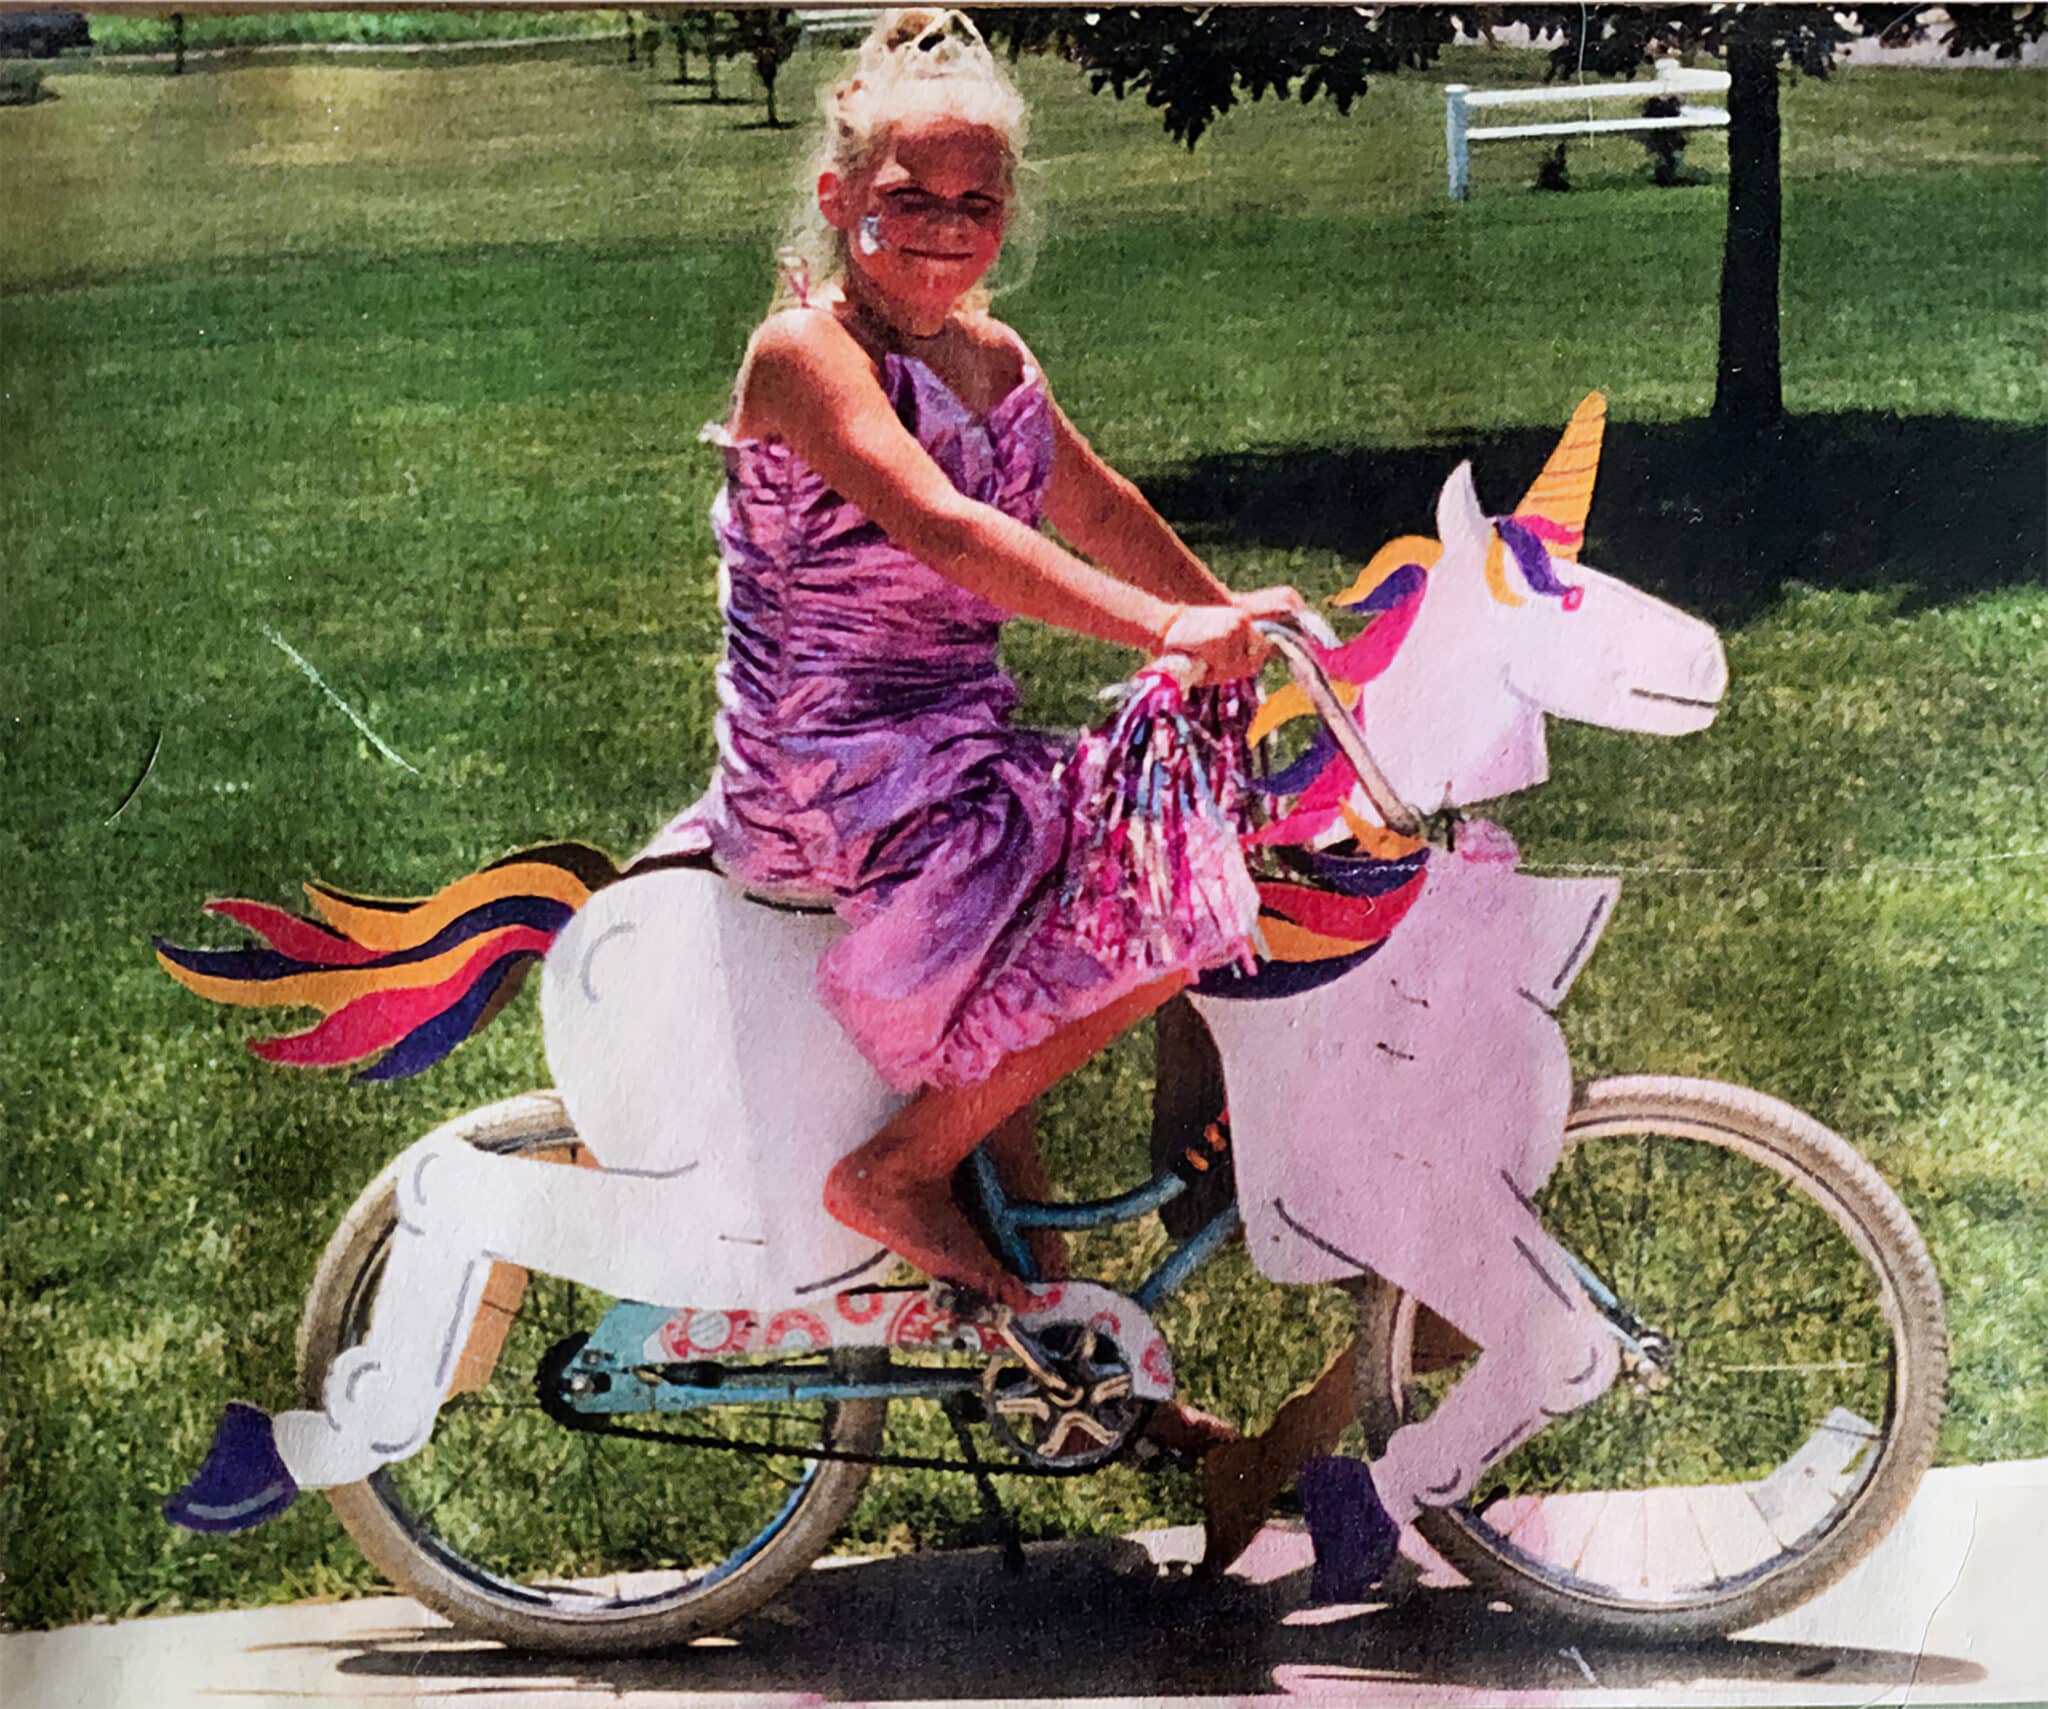 Curt's daughter as a child, a blonde girl wearing a pink metallic dress, riding a bicycle outfitted with a running unicorn cutout.